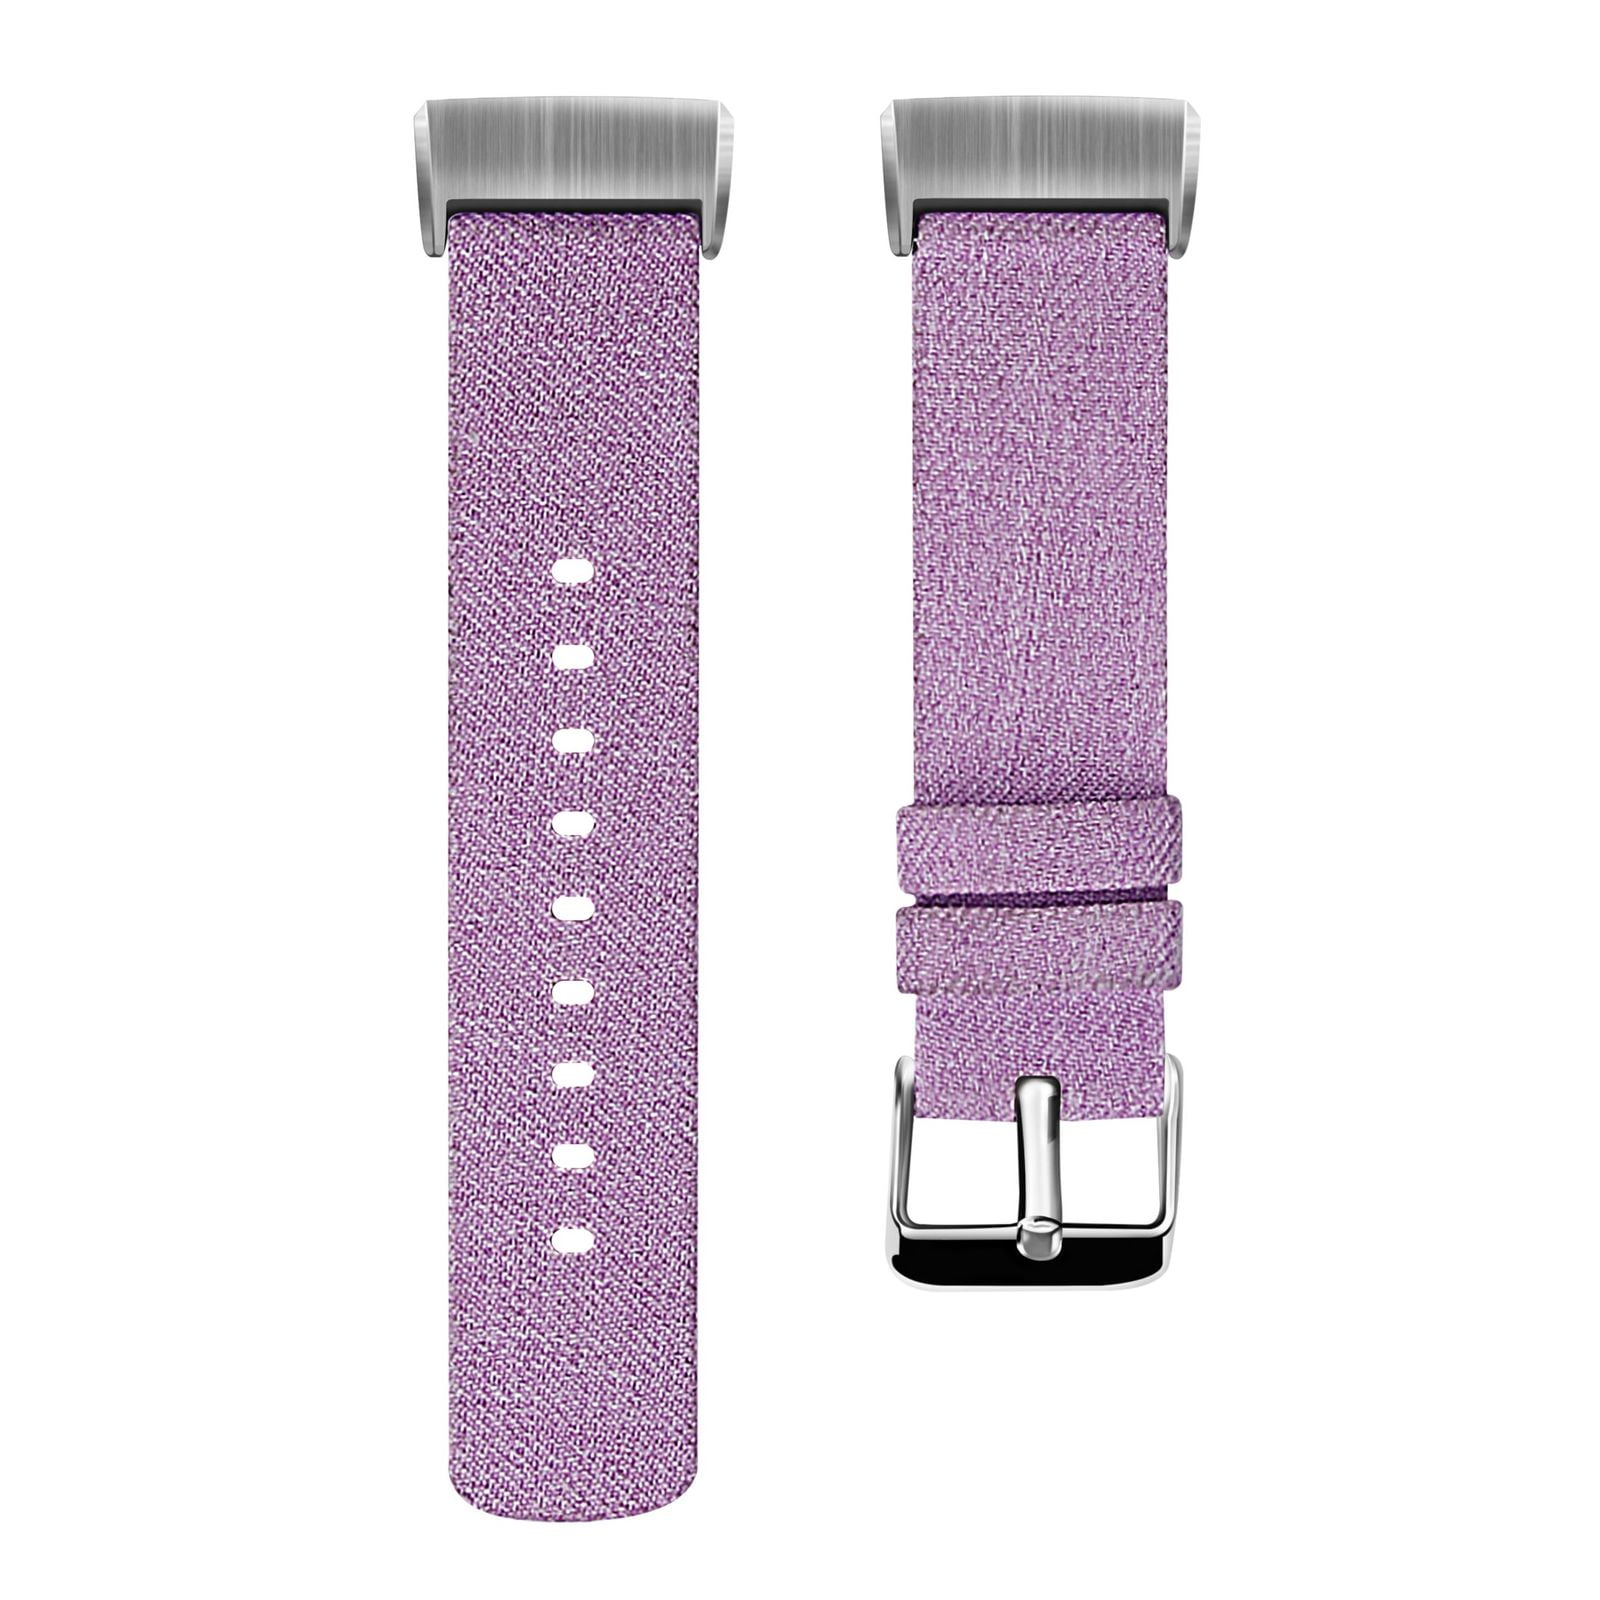 Insten Fabric Lavender Tracker Compatible Replacement 3 Charge for Watch Charge SE, with Bands 3, SE, 4 Fitbit Women, and Charge Men Fitness 4, Band Charge and